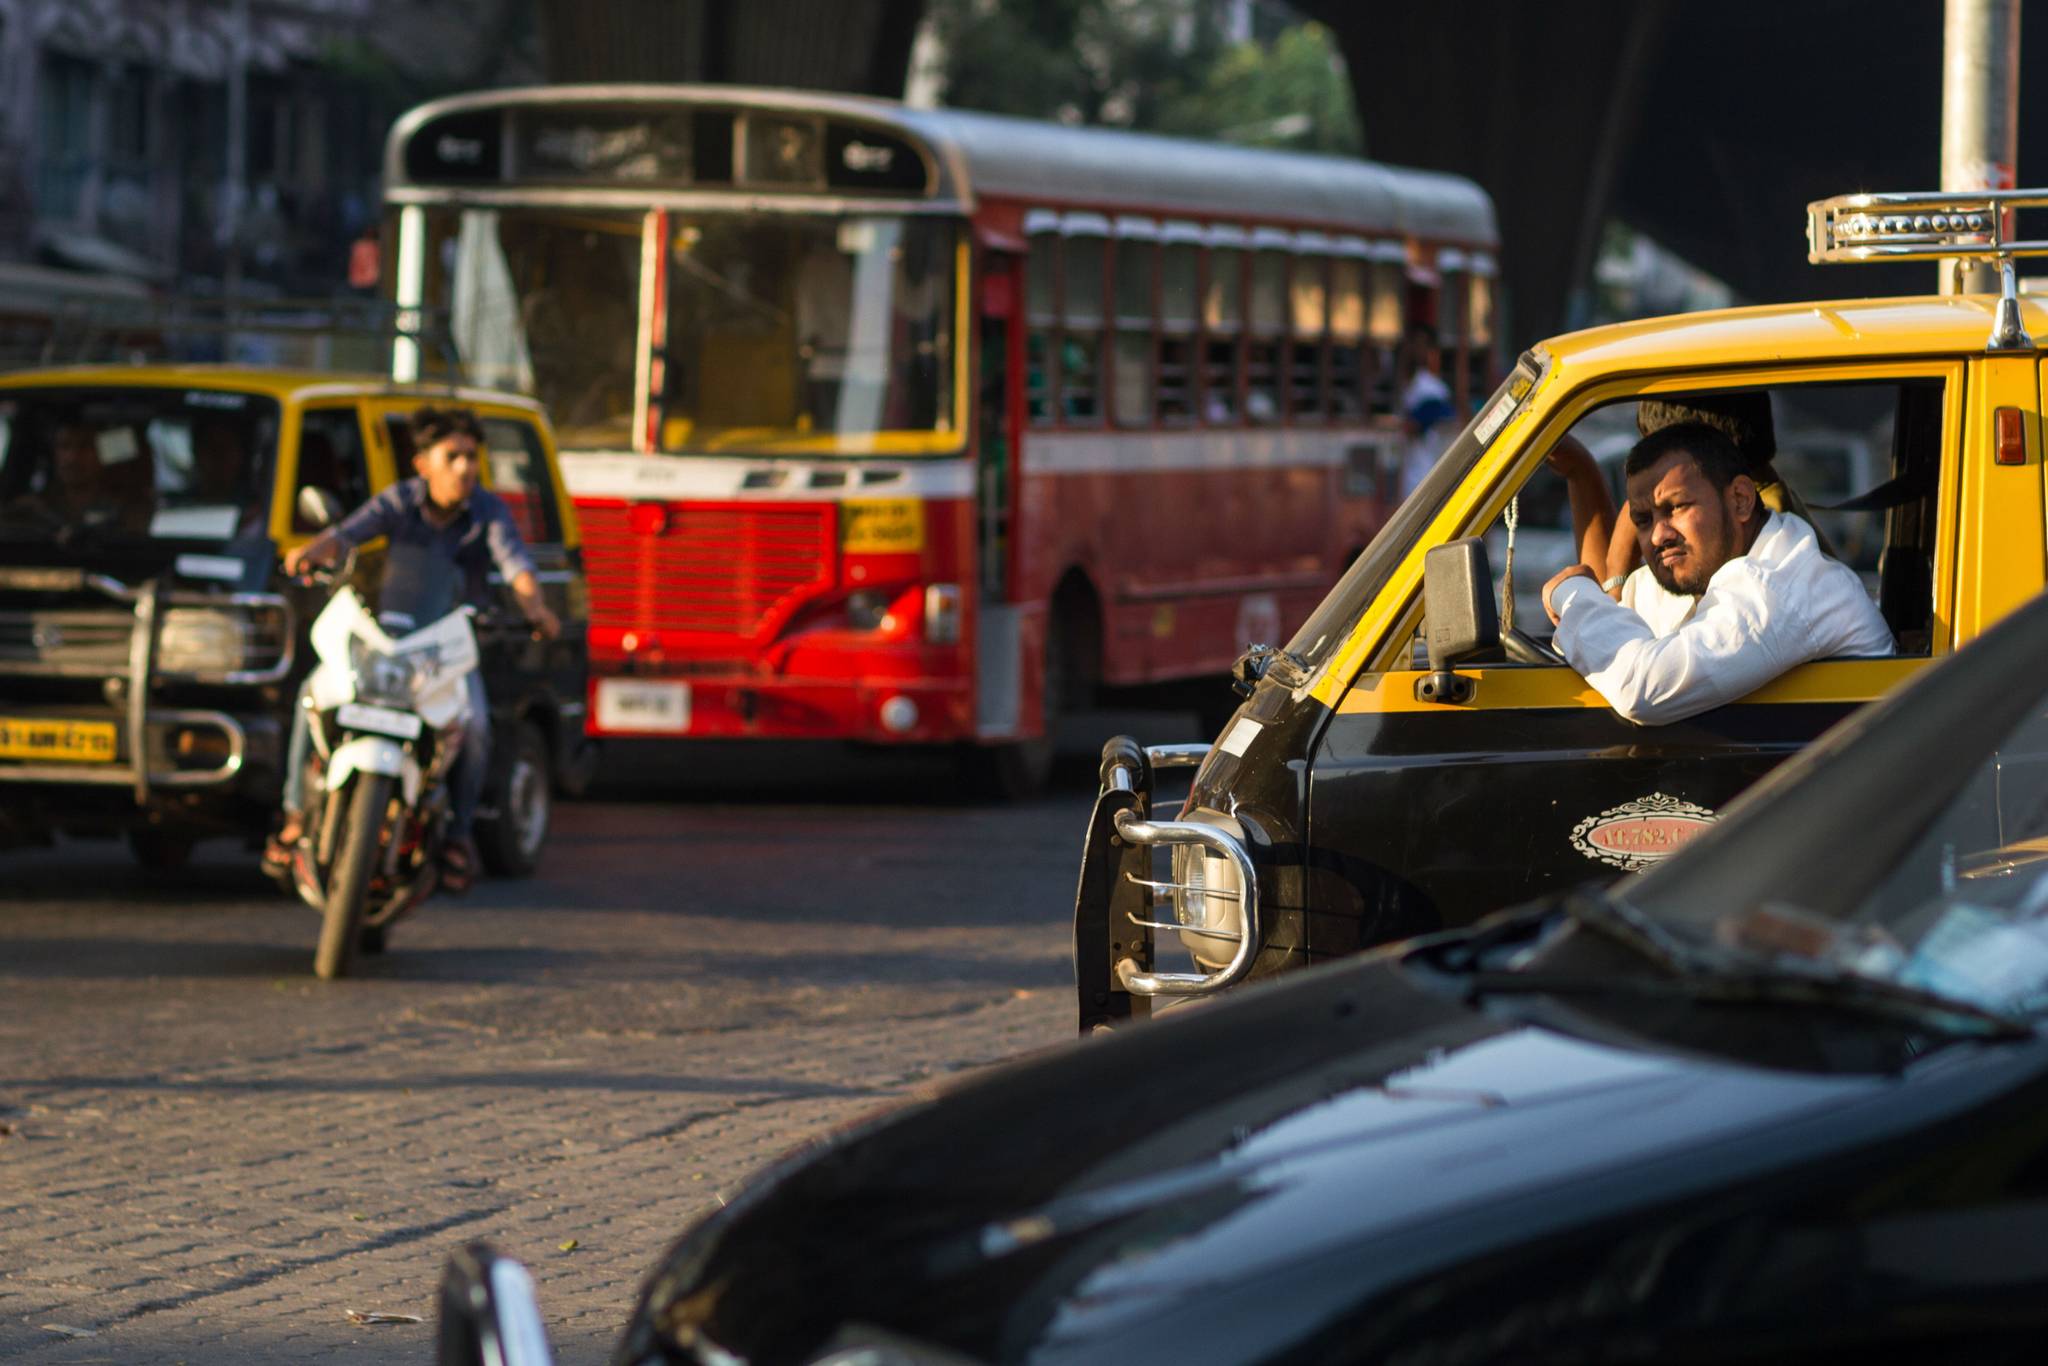 Car rental service Myles is driving change in India